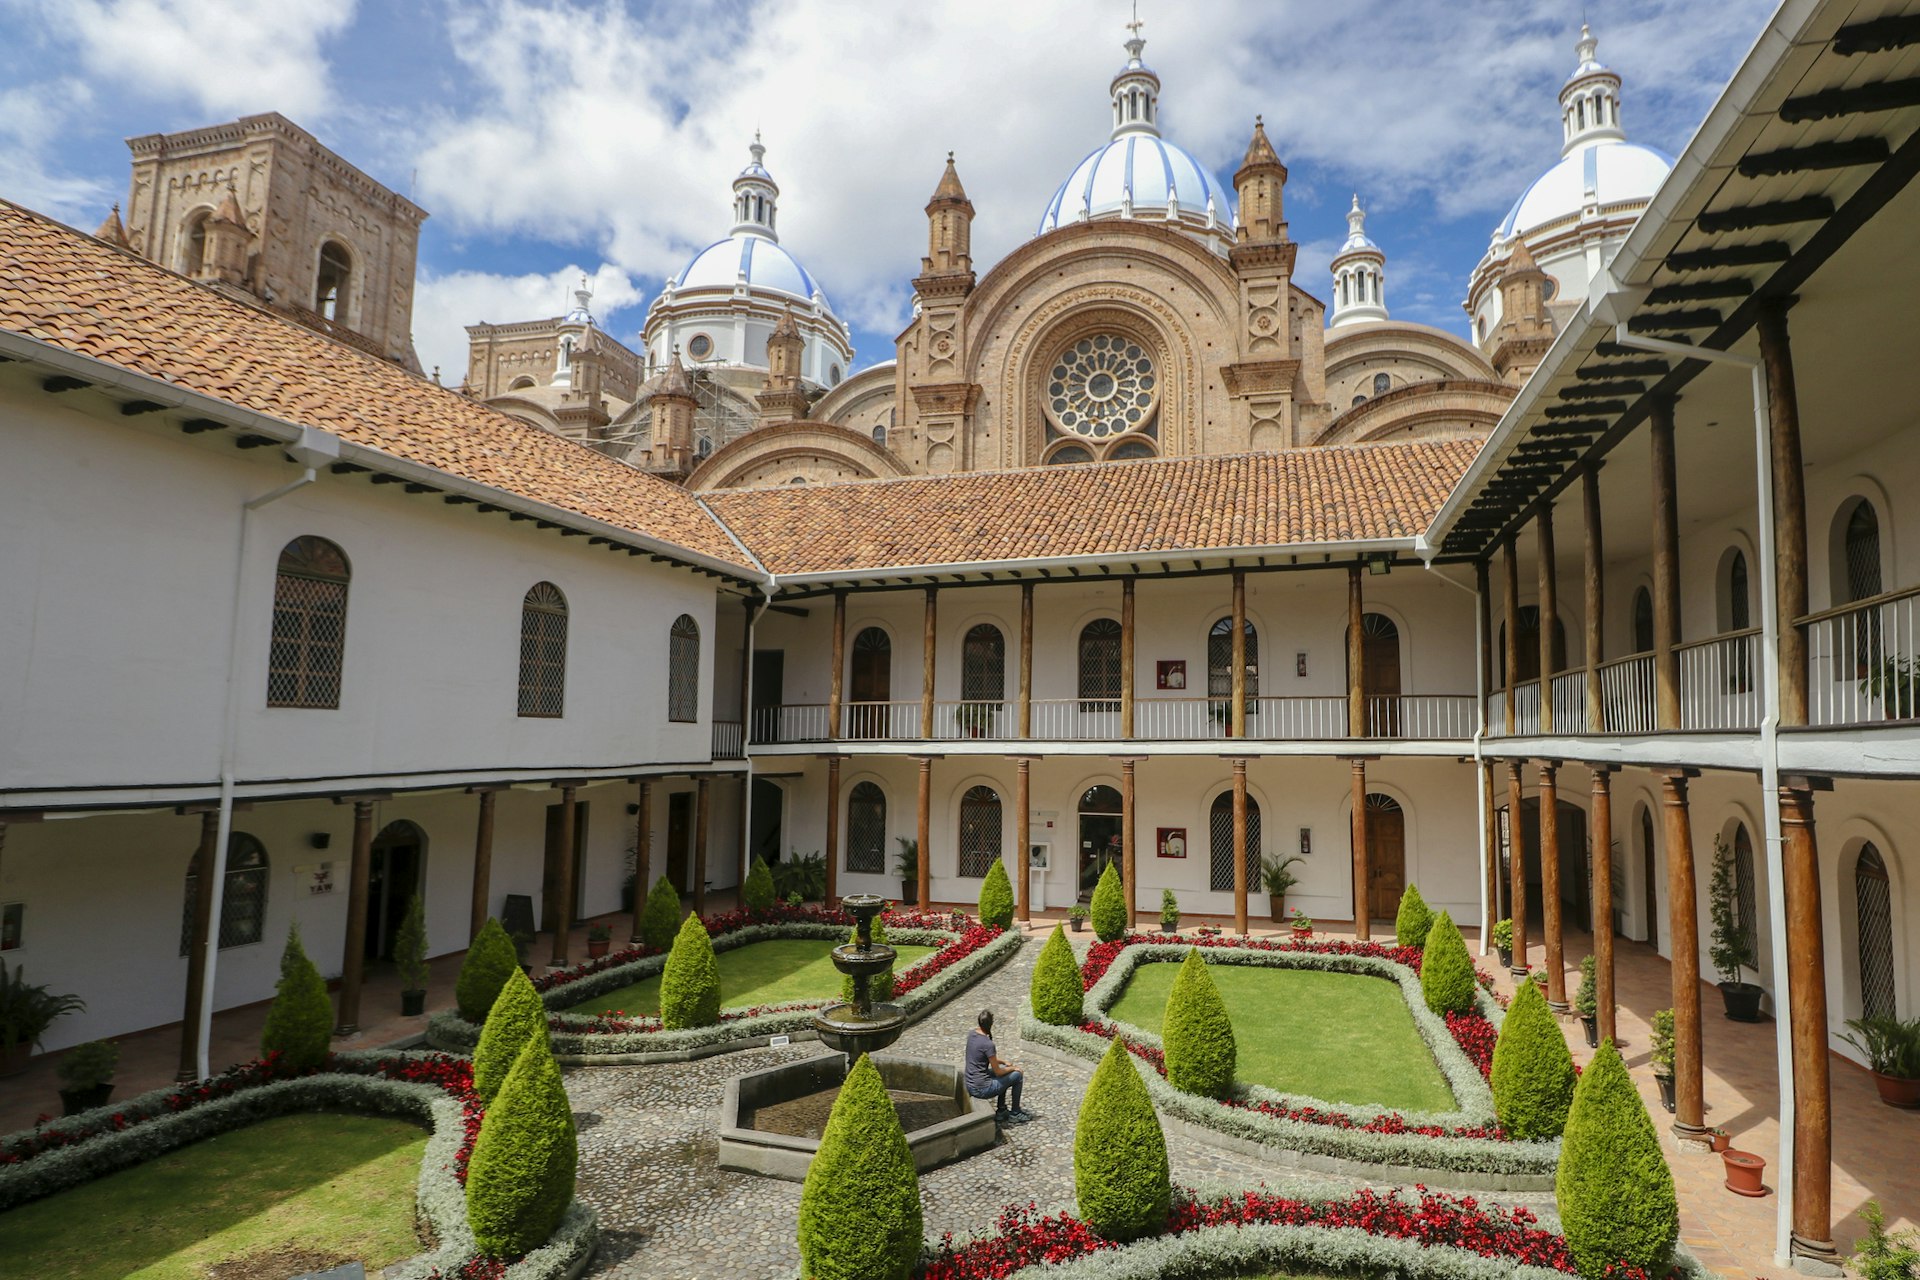 A woman sitting in the Cathedral of the Immaculate Conception in Cuenca, Ecuador